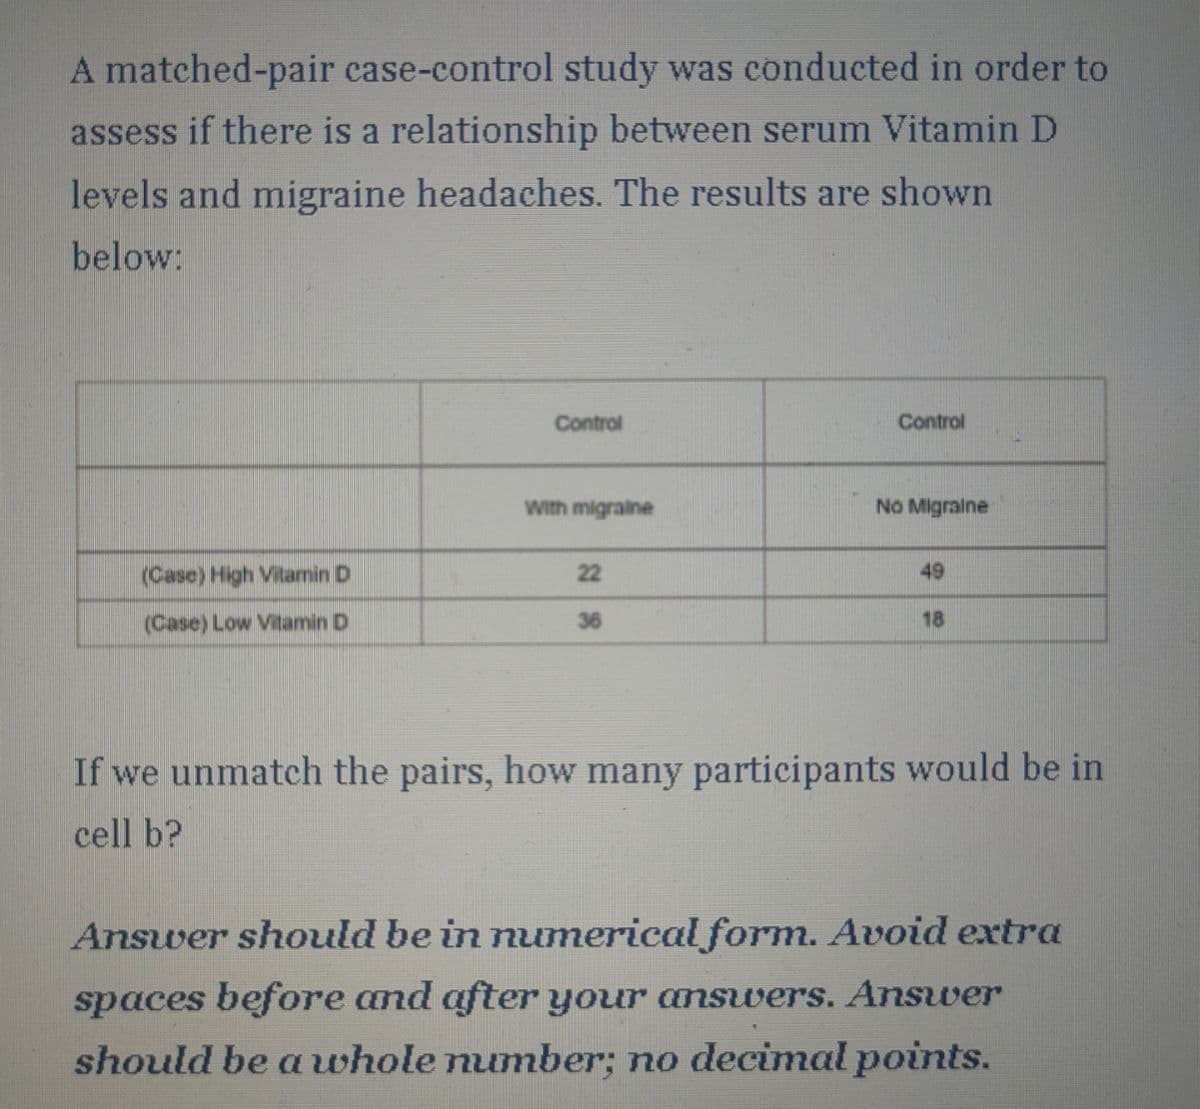 A matched-pair case-control study was conducted in order to
assess if there is a relationship between serum Vitamin D
levels and migraine headaches. The results are shown
below:
Control
Control
With migraine
No Migraine
22
49
(Case) High Vitamin D
(Case) Low Vitamin D
36
18
If we unmatch the pairs, how many participants would be in
cell b?
Answer should be in numerical form. Avoid extra
spaces before and after your answers. Answer
should be a whole number; no decimal points.